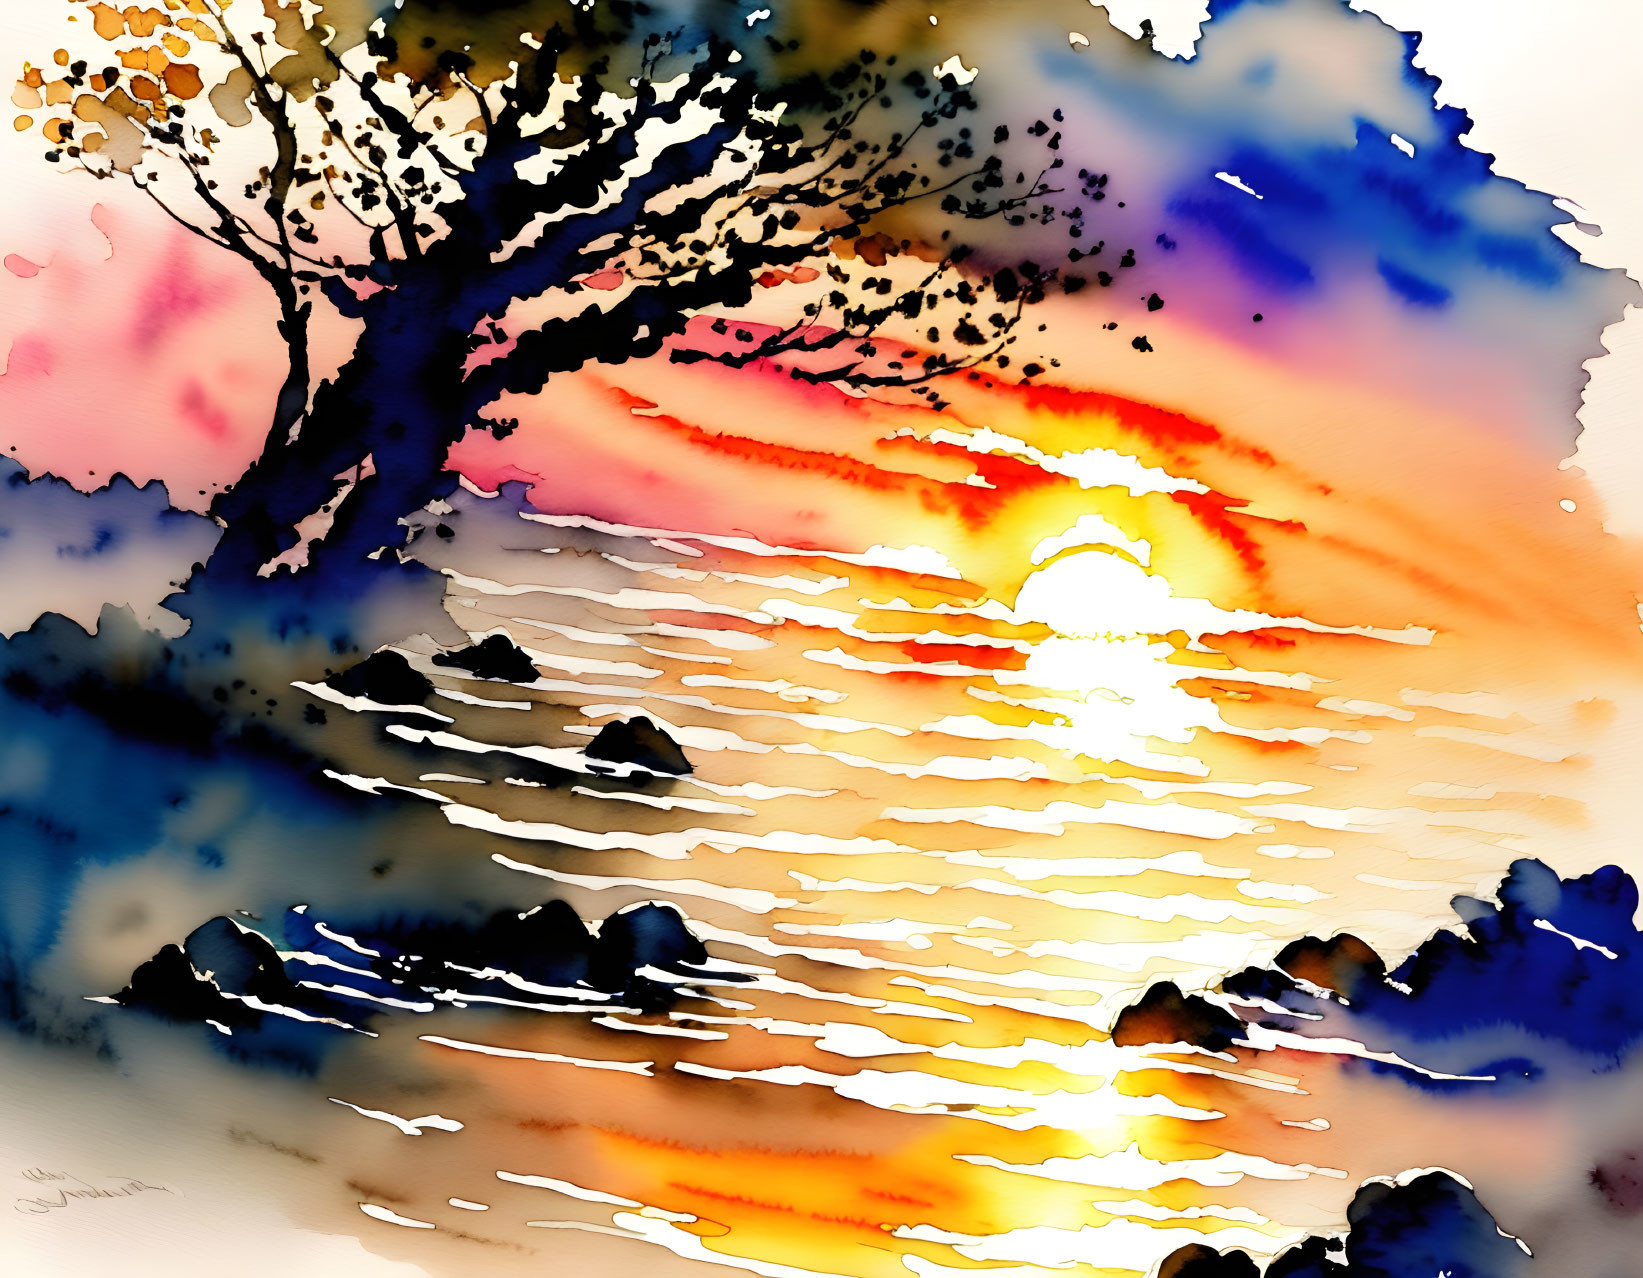 Colorful Watercolor Sunset Silhouette Tree Reflections Art